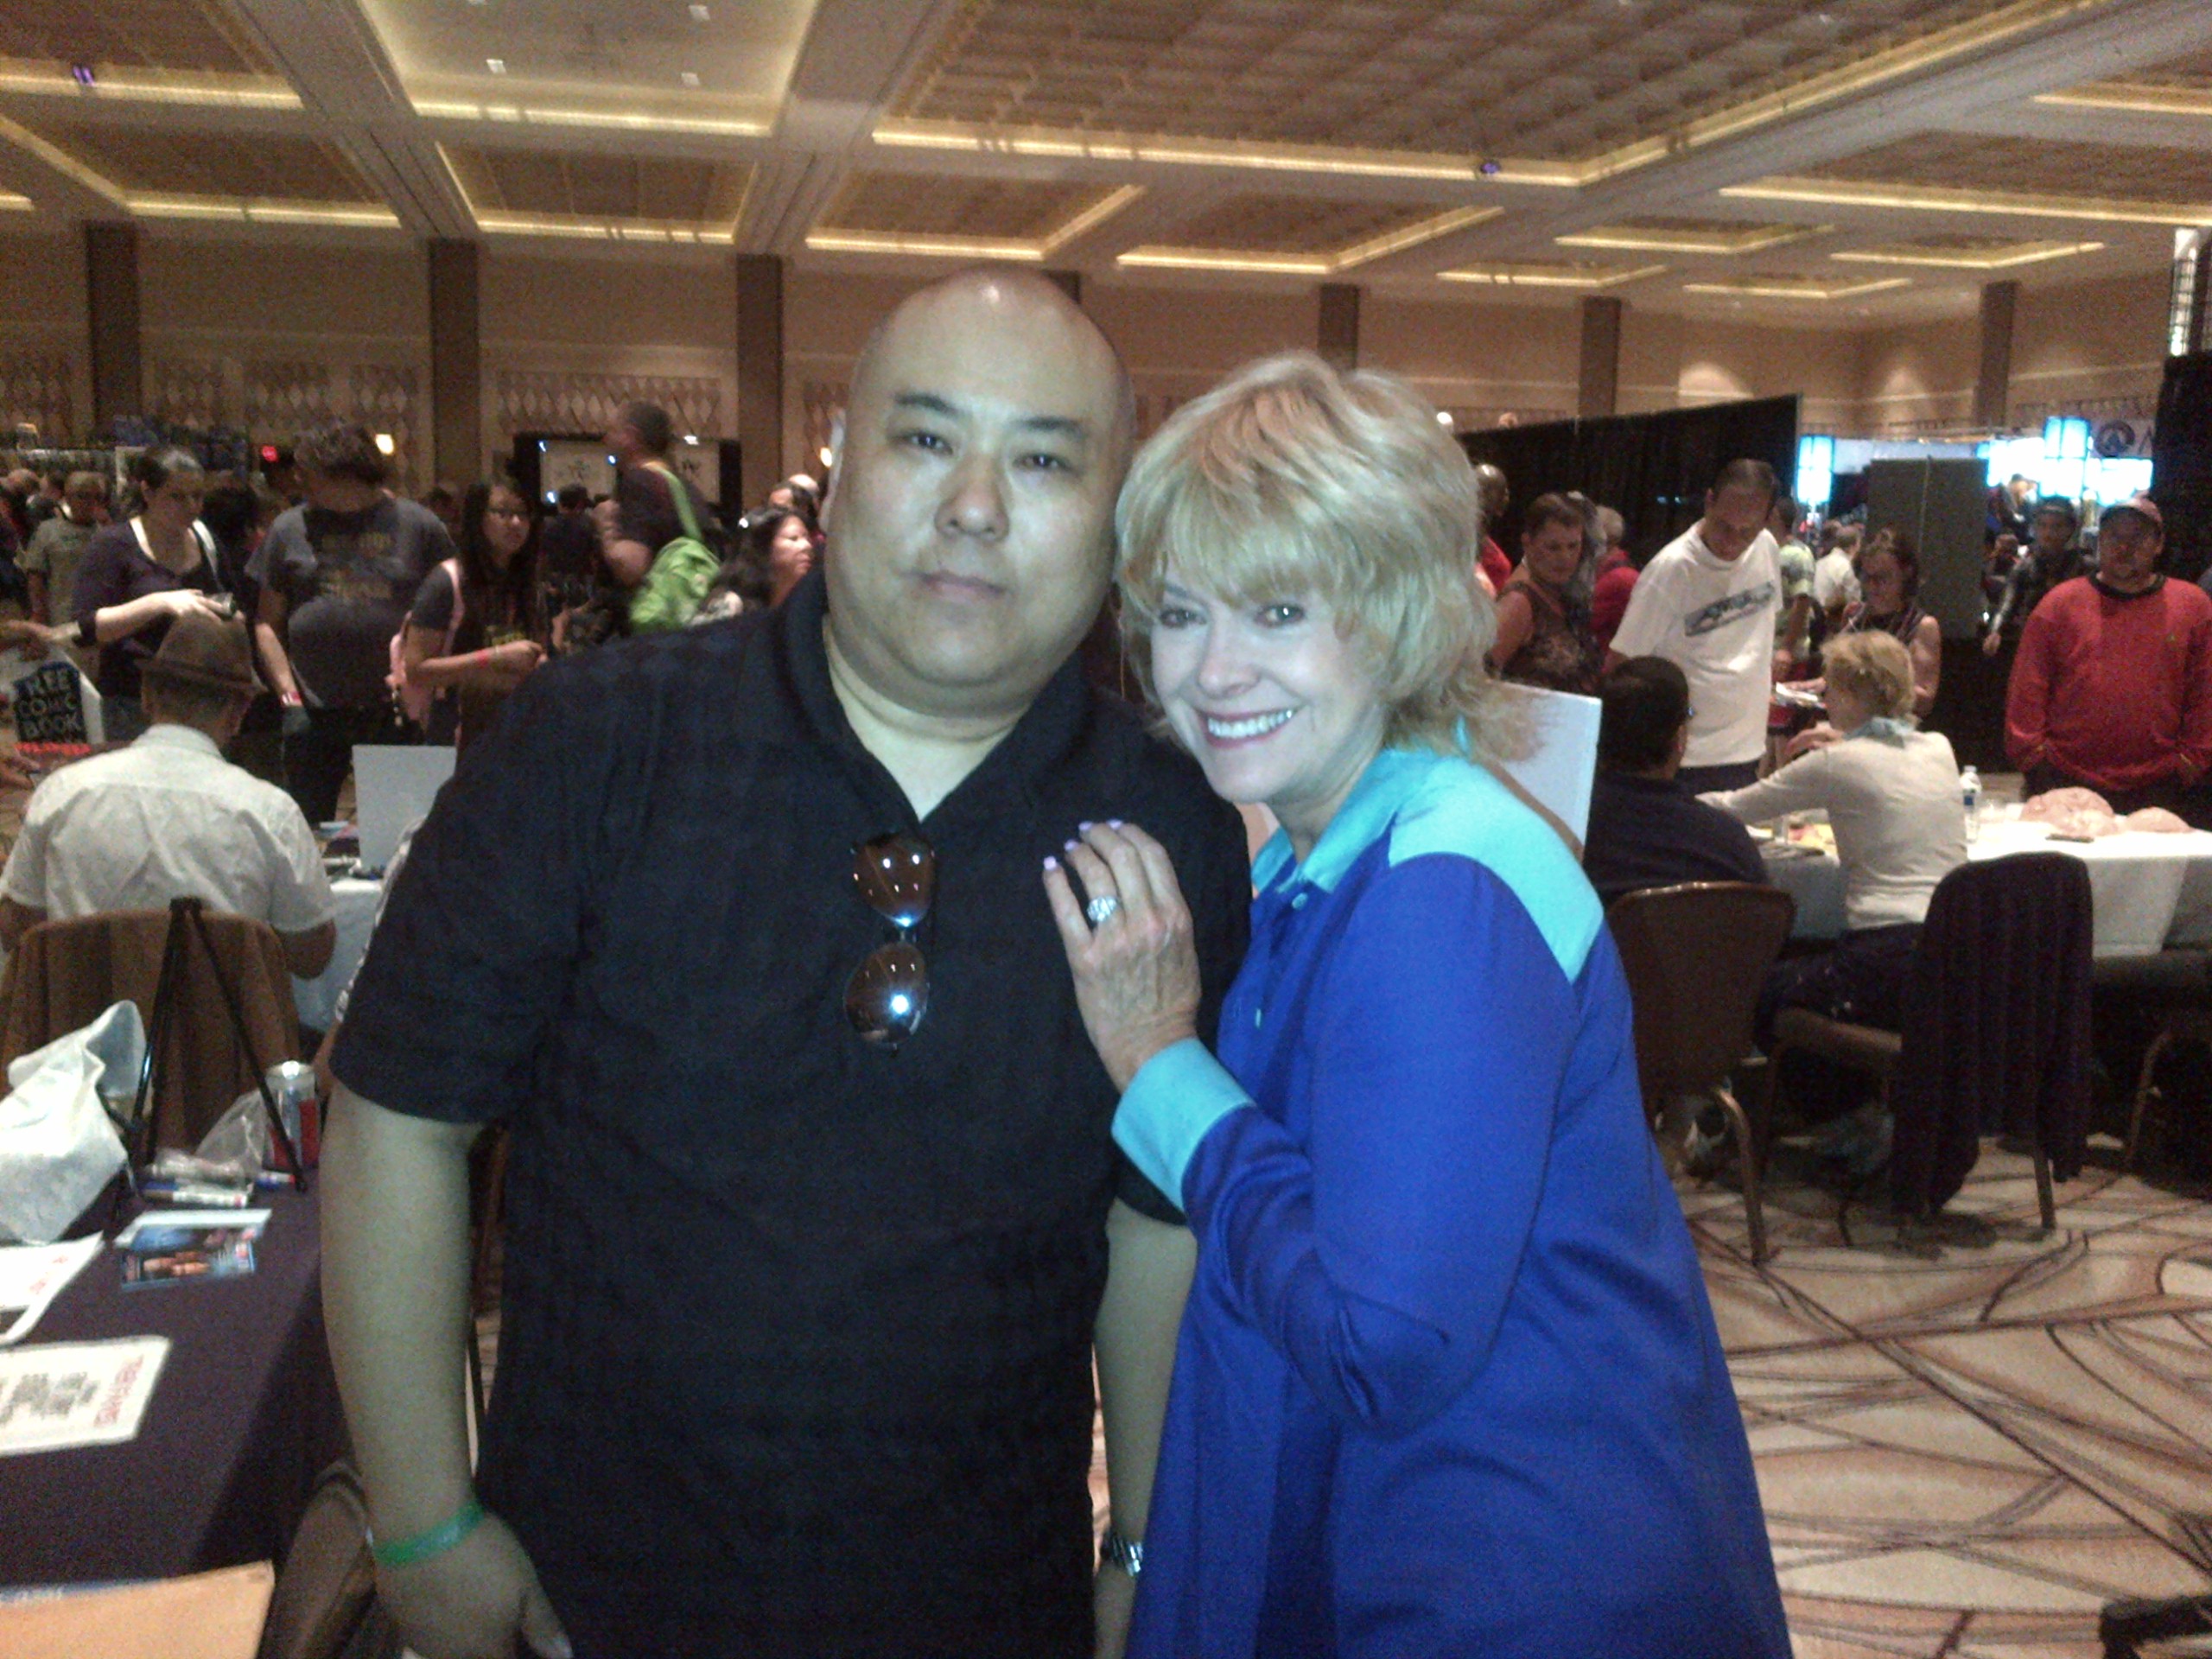 Together with Catherine Hicks of 